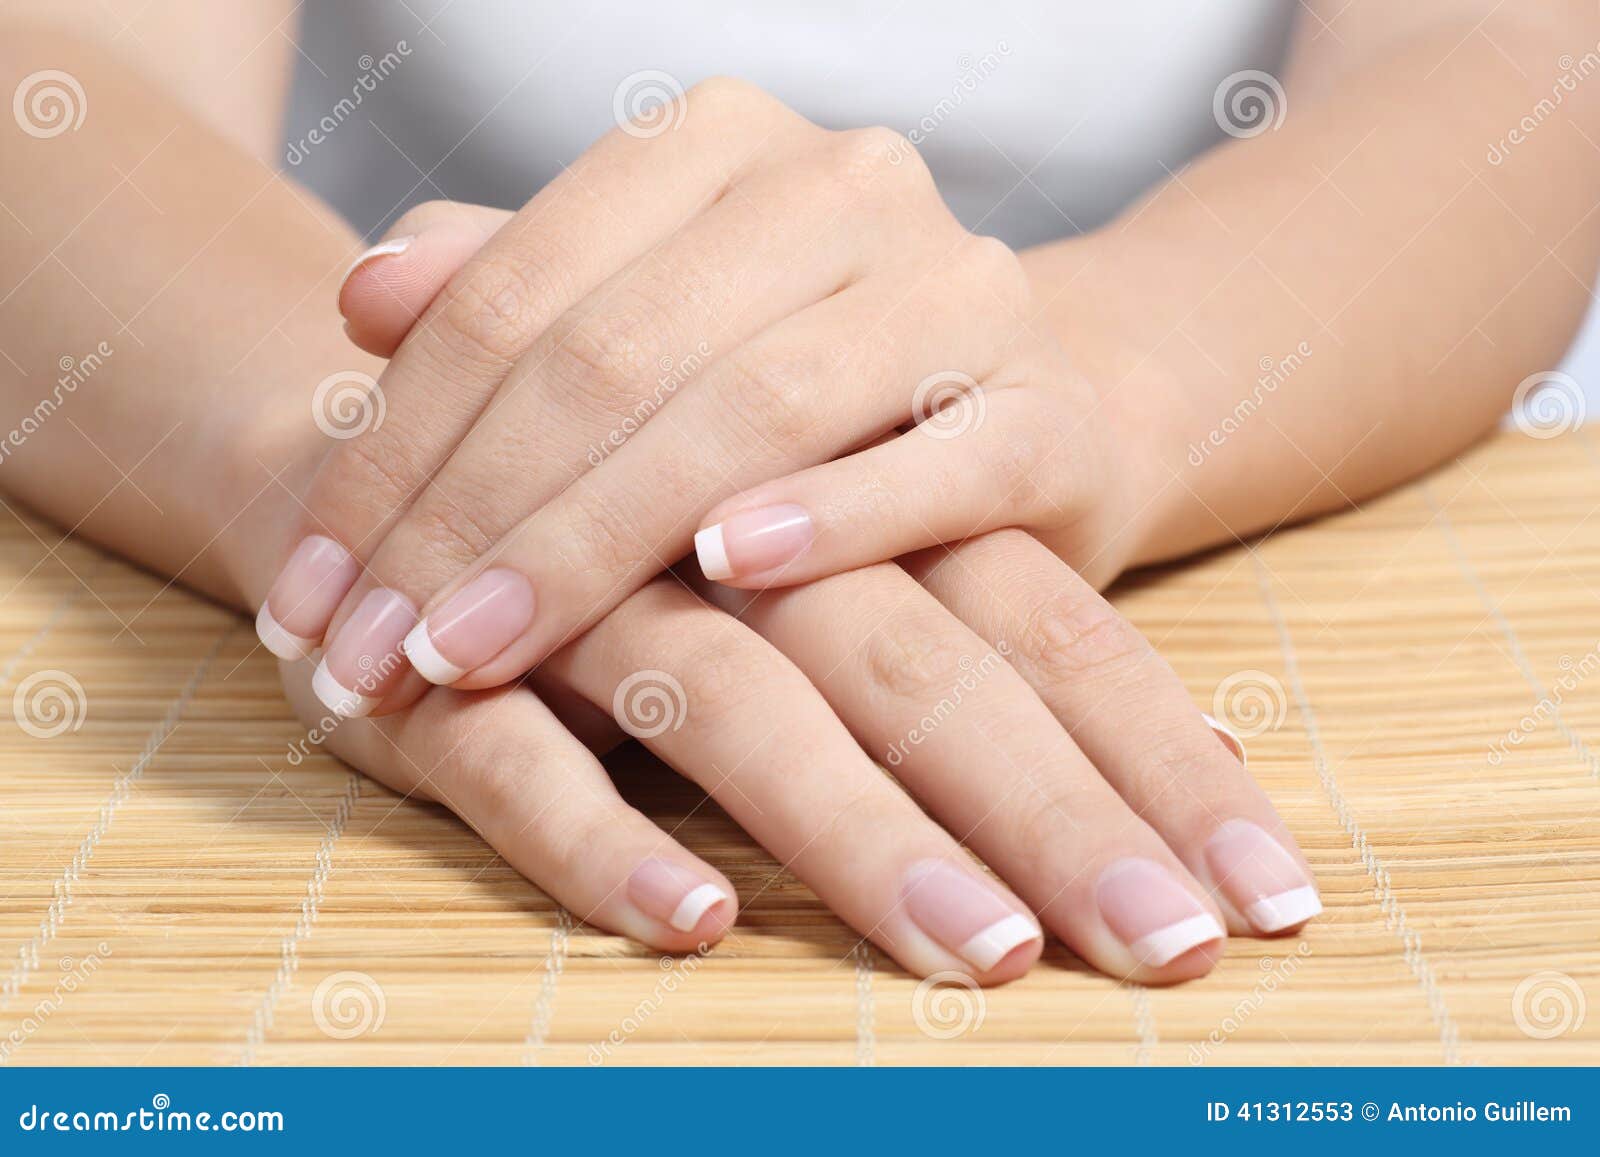 beautiful woman hands and nails with perfect french manicure